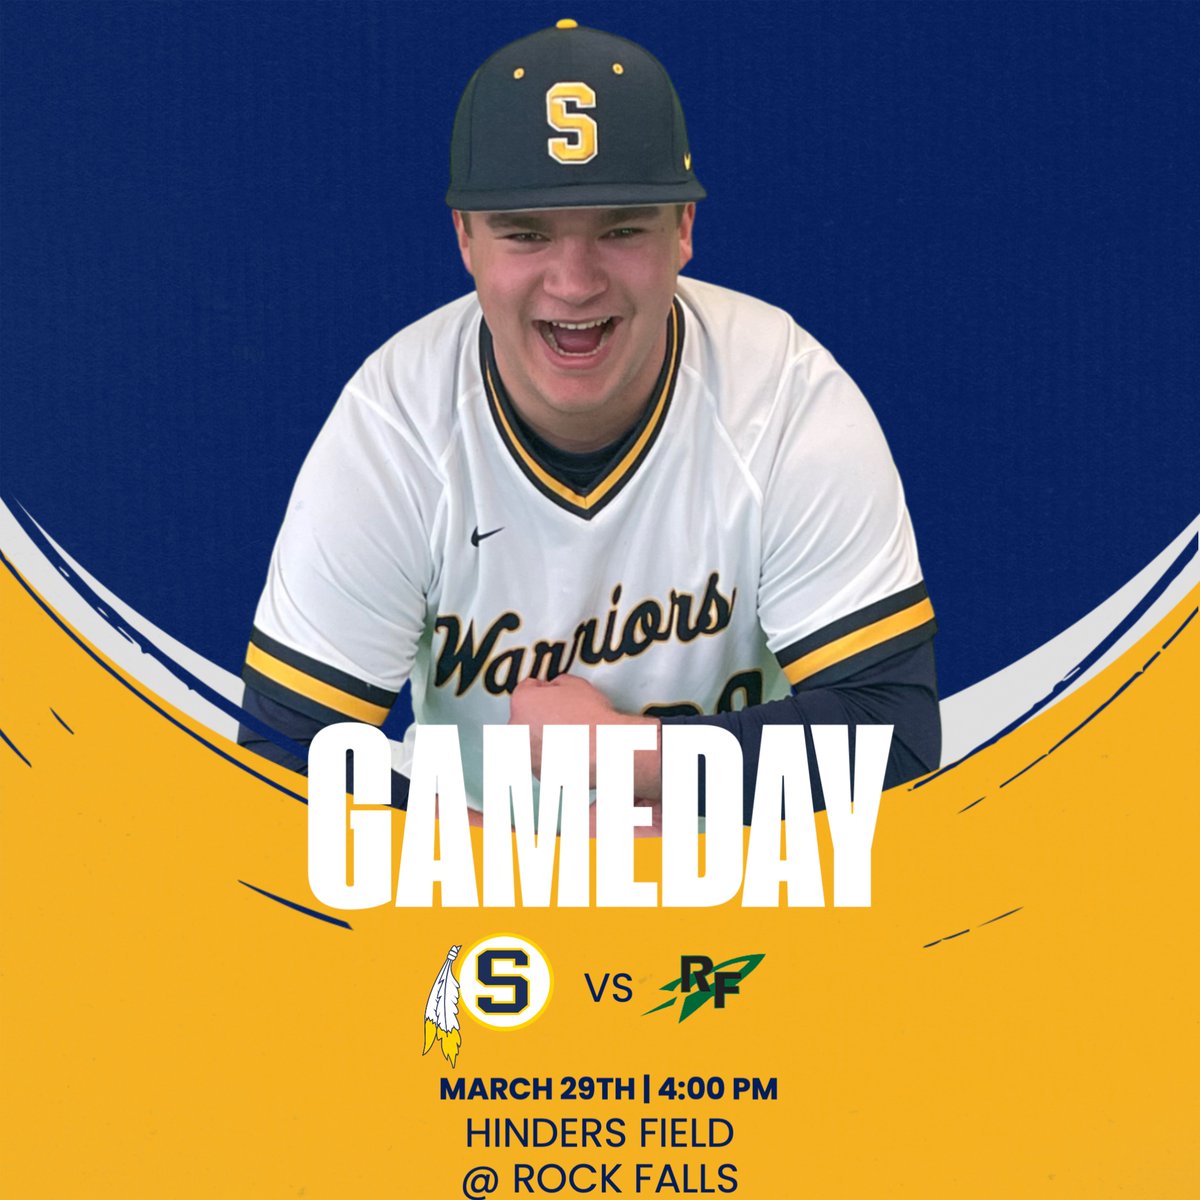 It’s a 4:00 first pitch for SHS Baseball at Rock Falls today.  Good luck guys!

Let’s #GOldenWARRIORS! #BeatRockFalls